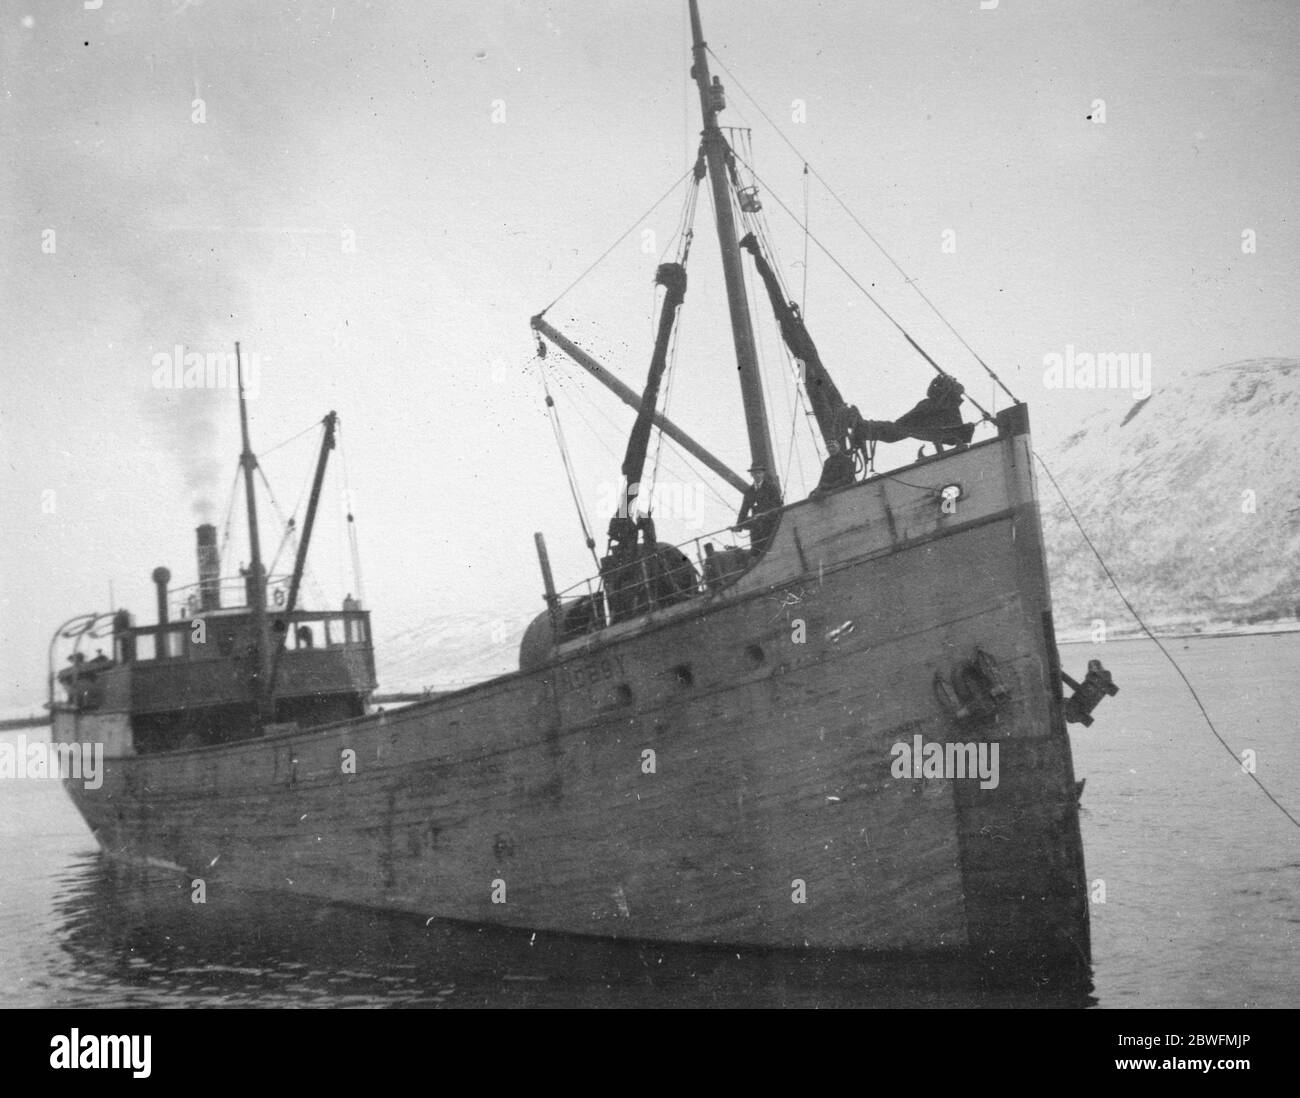 Amundsen Ellsworth Polar Flight The Hobby one of the Expedition ' s two ships . The Hobby was charged with the responsible task of transporting the aeroplanes to the Expedition ' s base at Spitzbergen 14 April 1925 Stock Photo